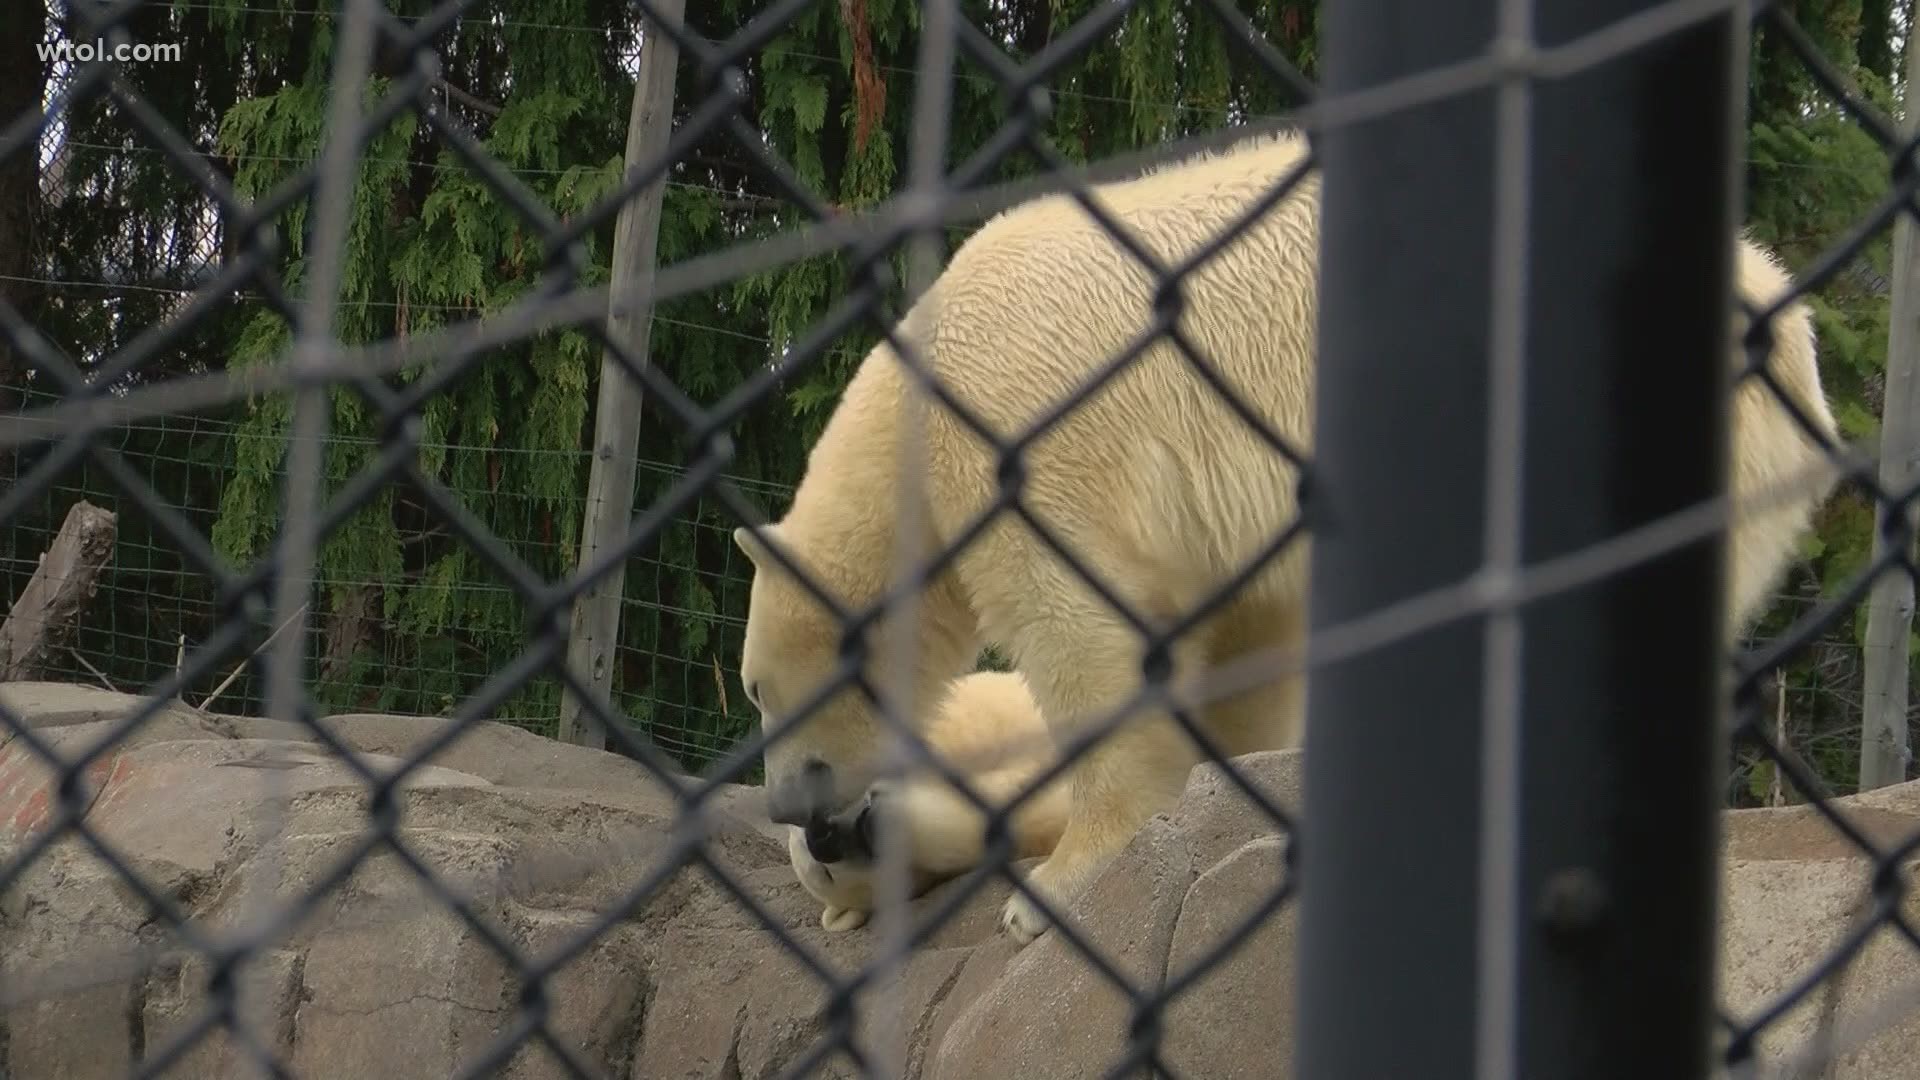 The two-year-old is expected to be joining a female polar bear at the Henry Vilas Zoo in Madison, Wisconsin.